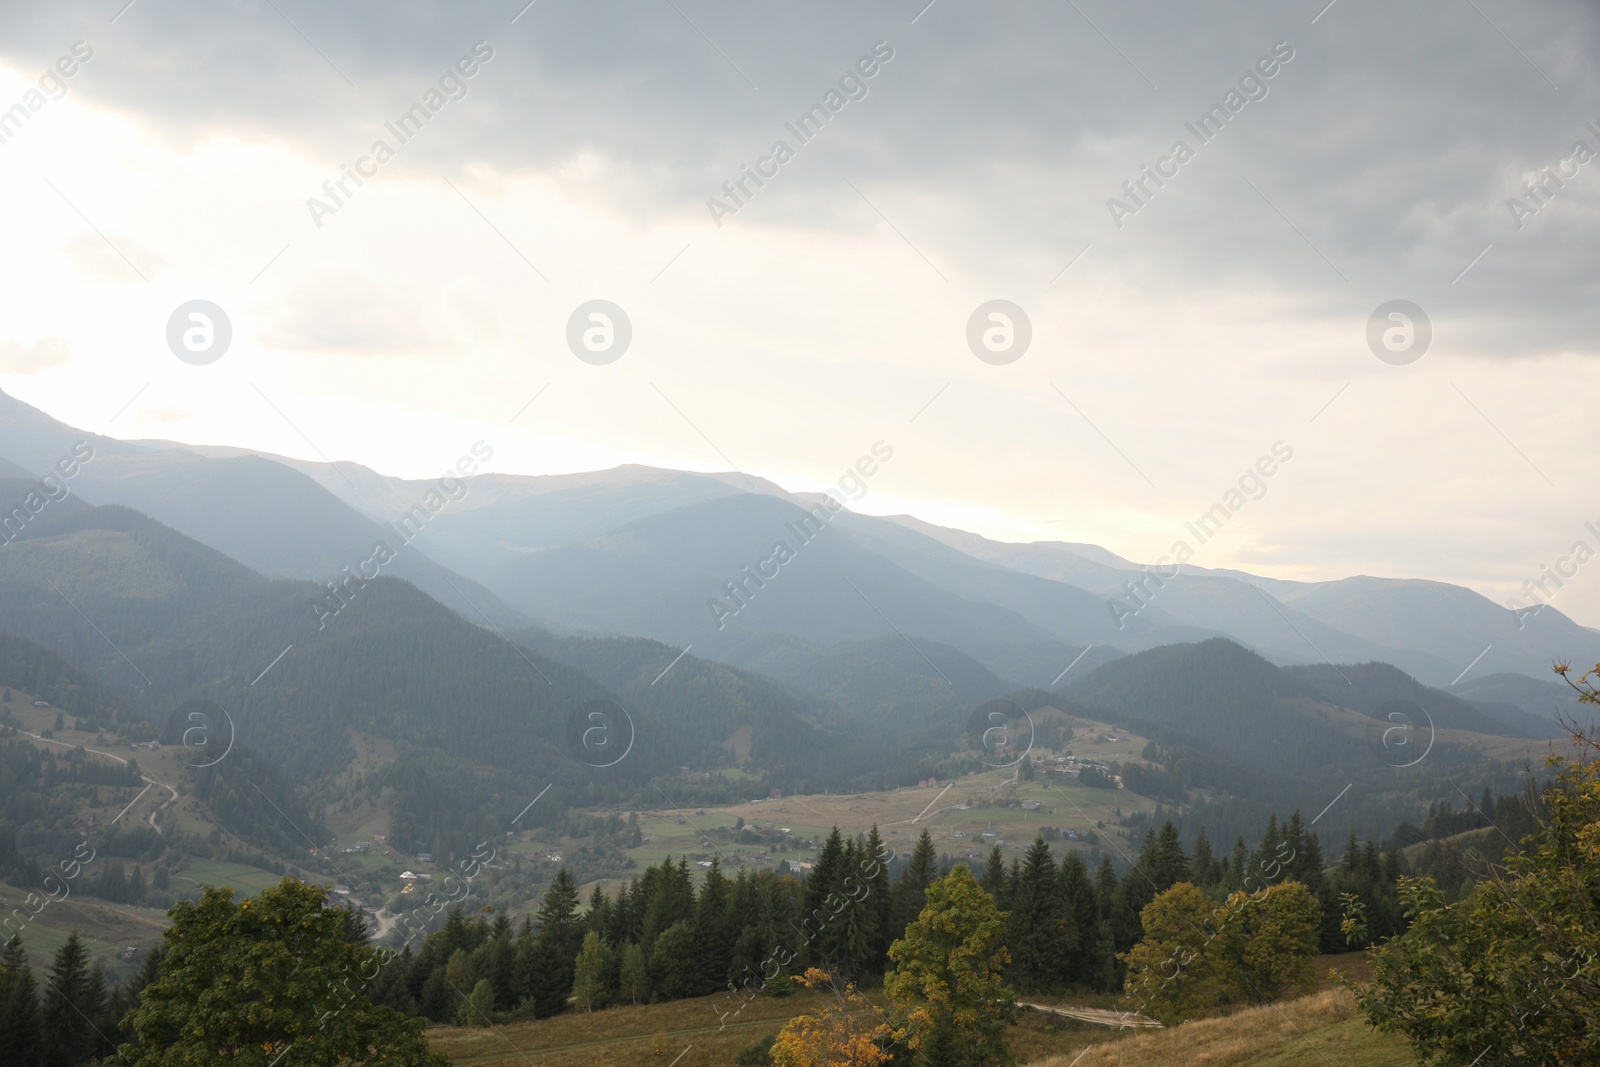 Photo of Picturesque view of beautiful mountains with conifer forest and village